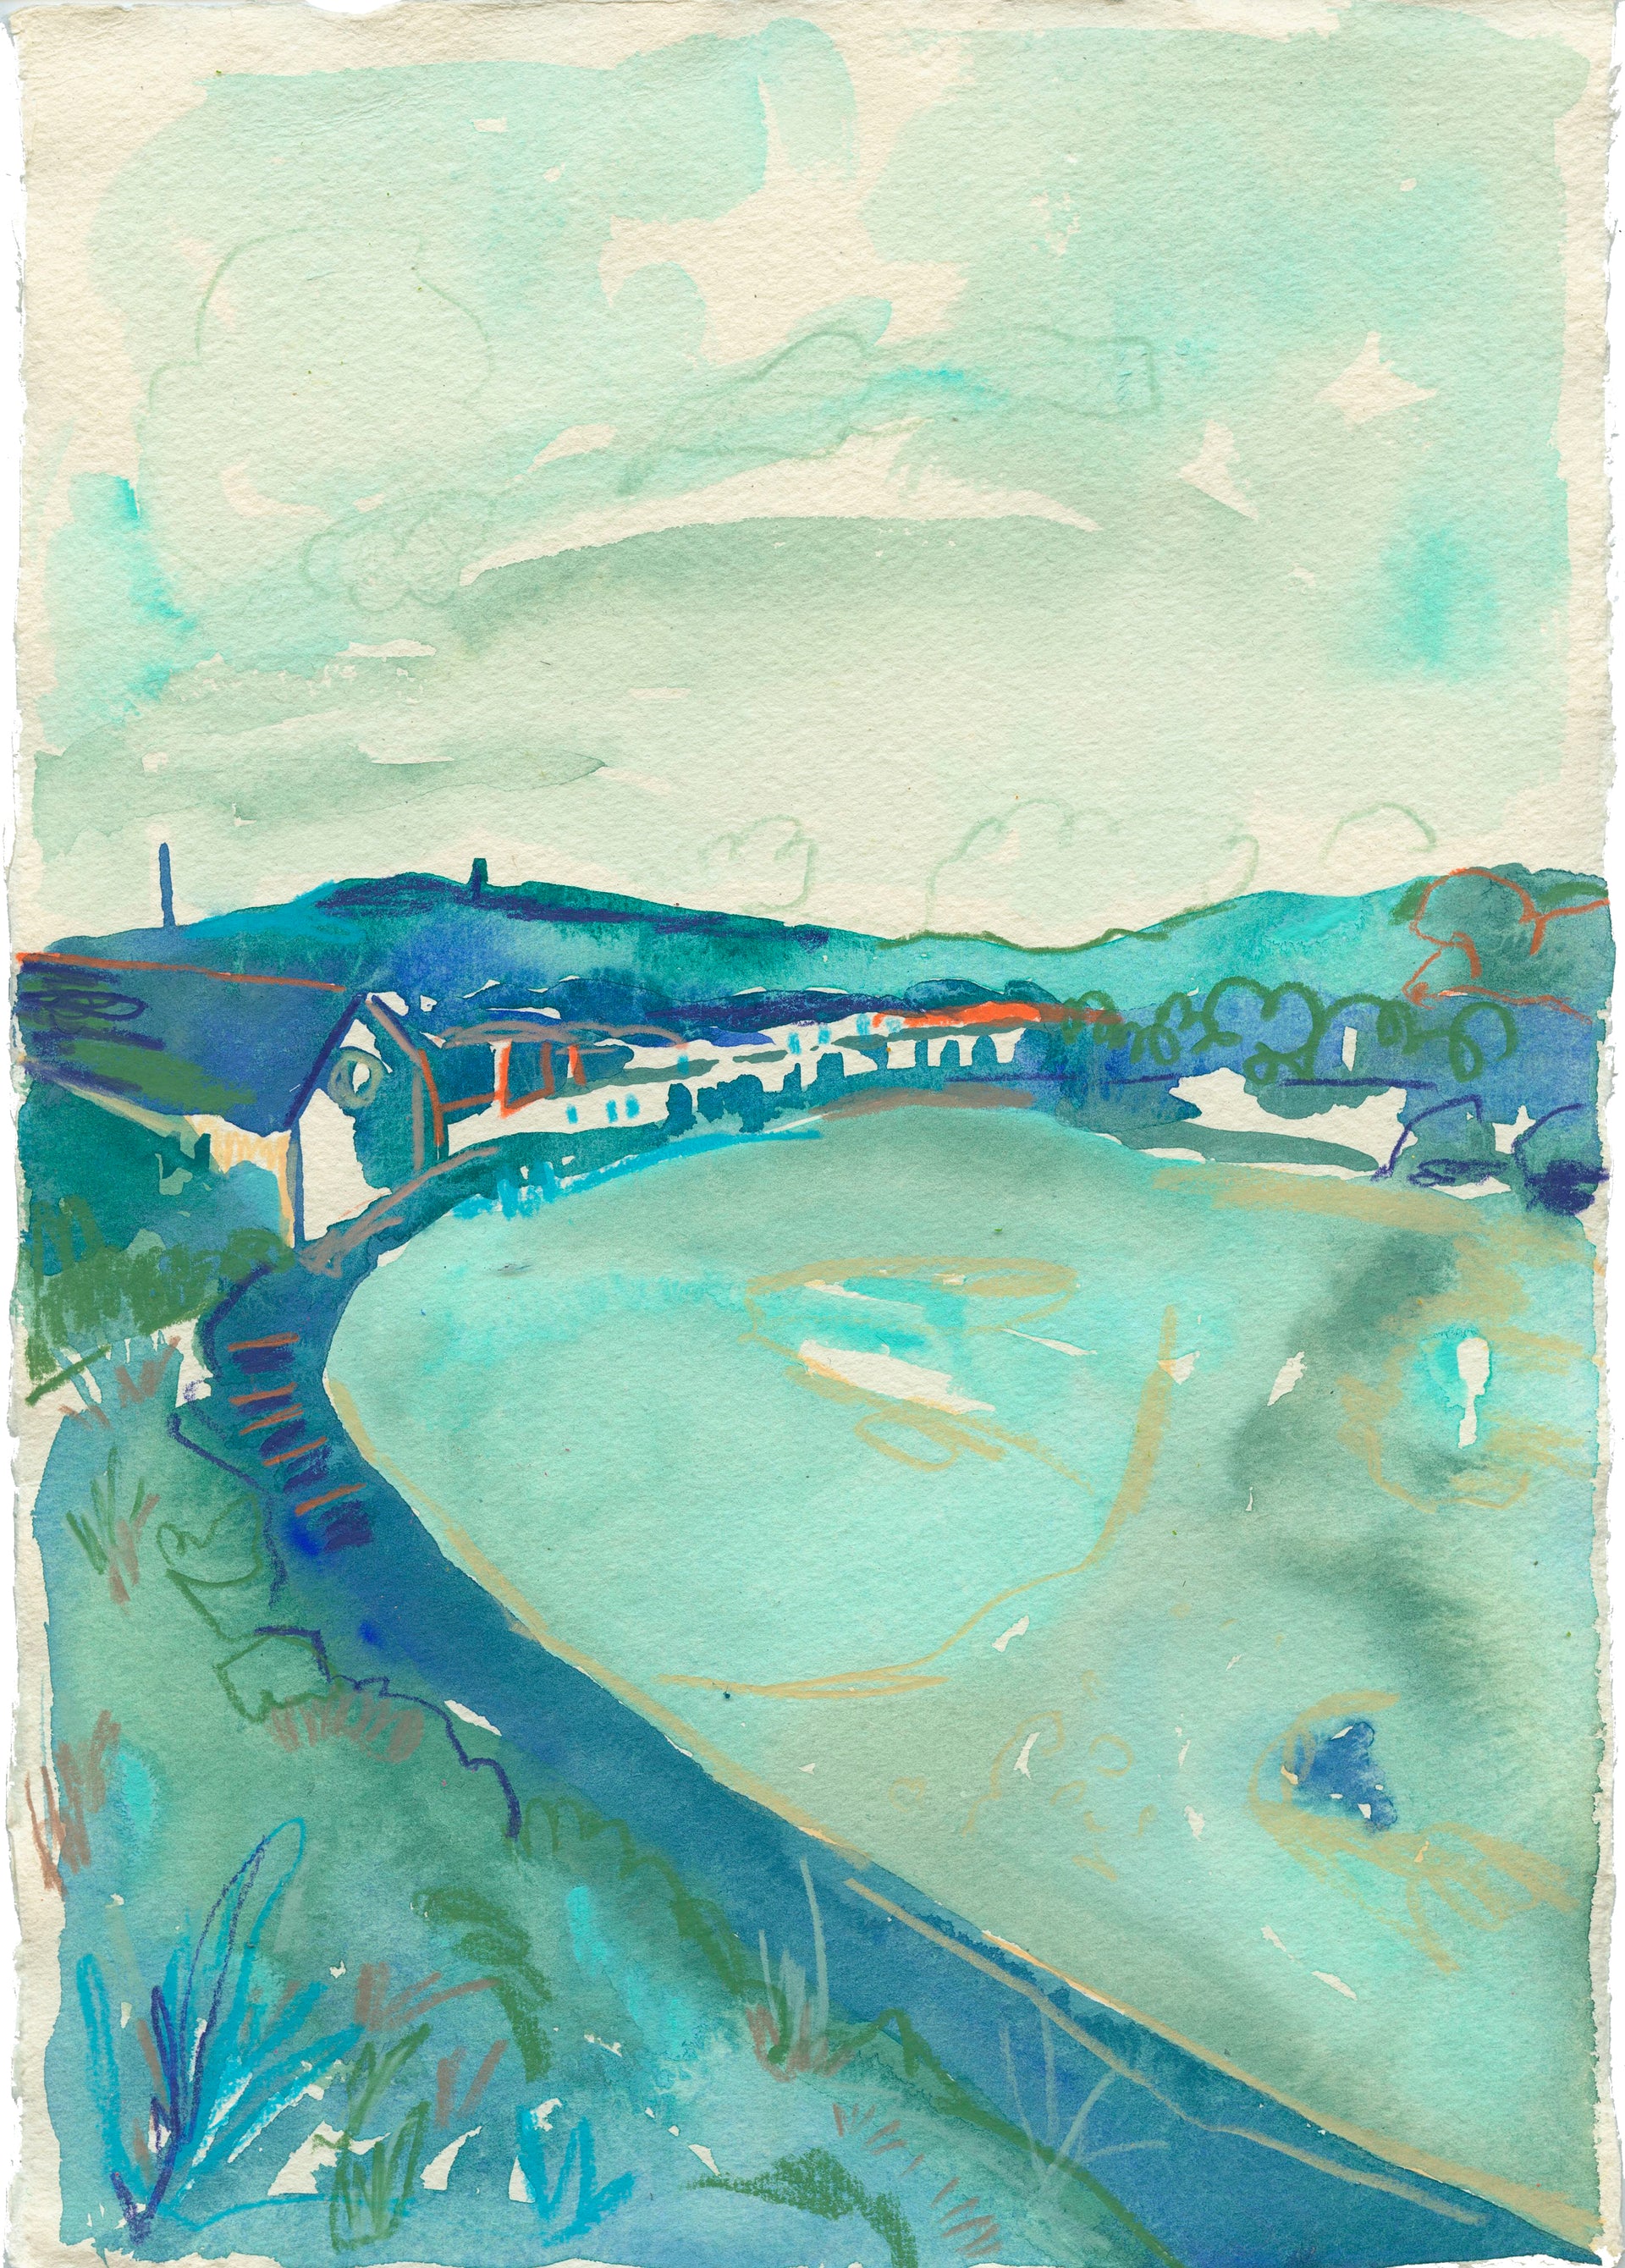 Porthwidden seascape in blue and turquoise tones by artist Lucy Williams.